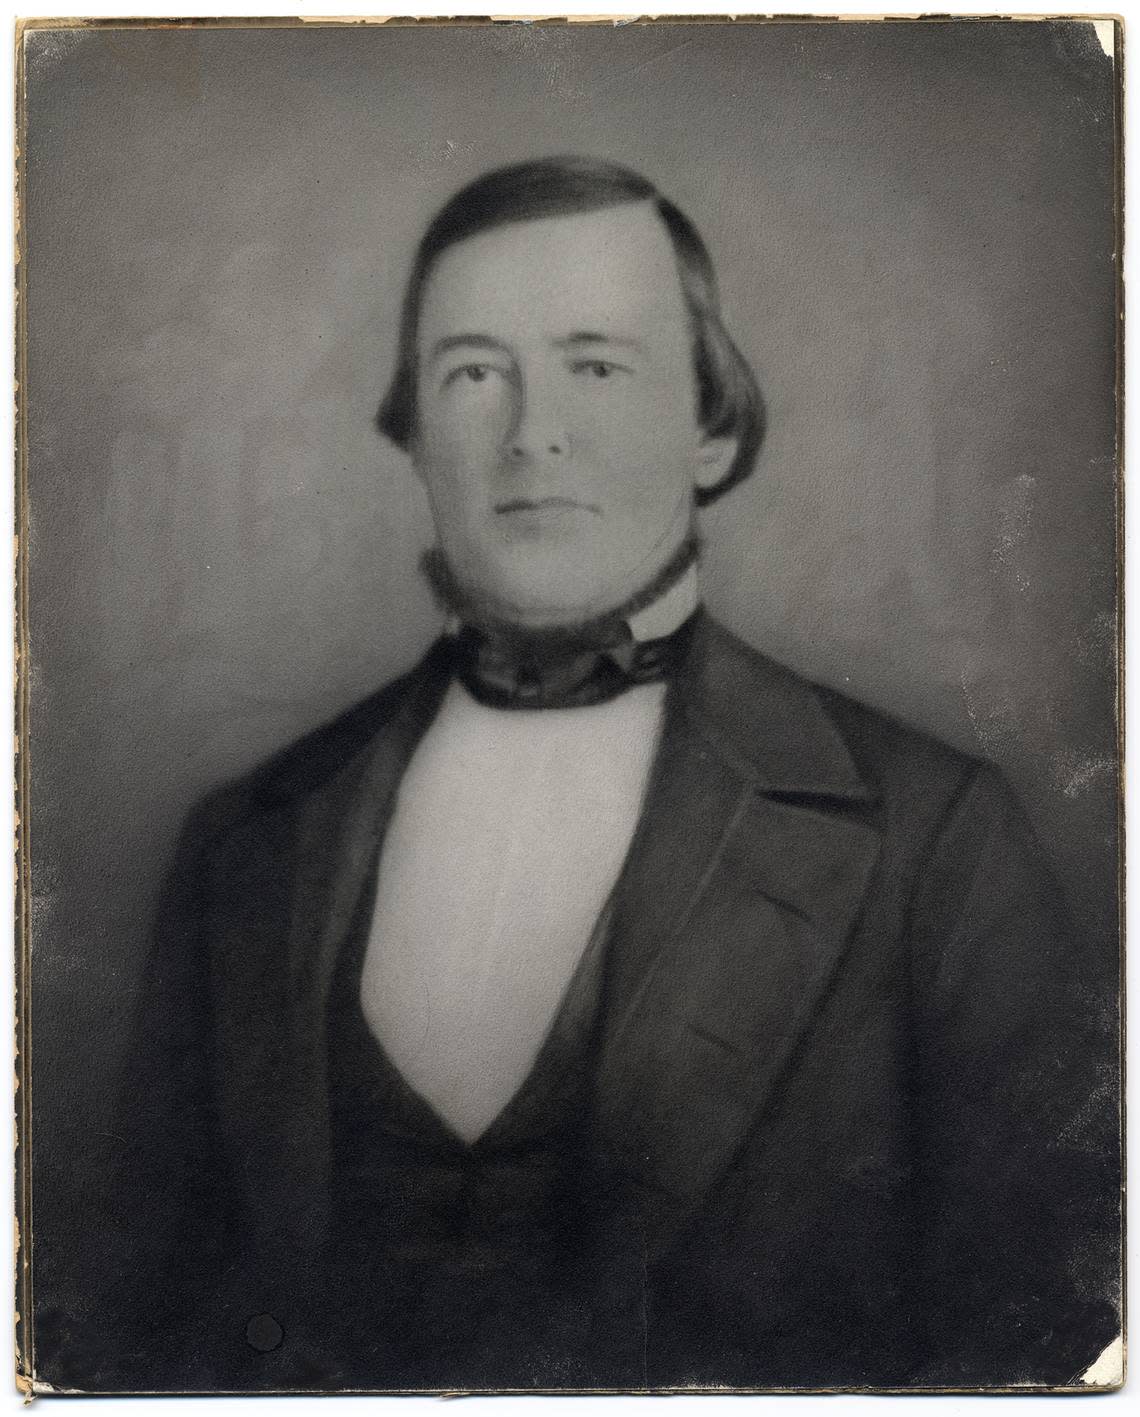 Hardin Bigelow, first elected mayor of Sacramento. California State LIbrary